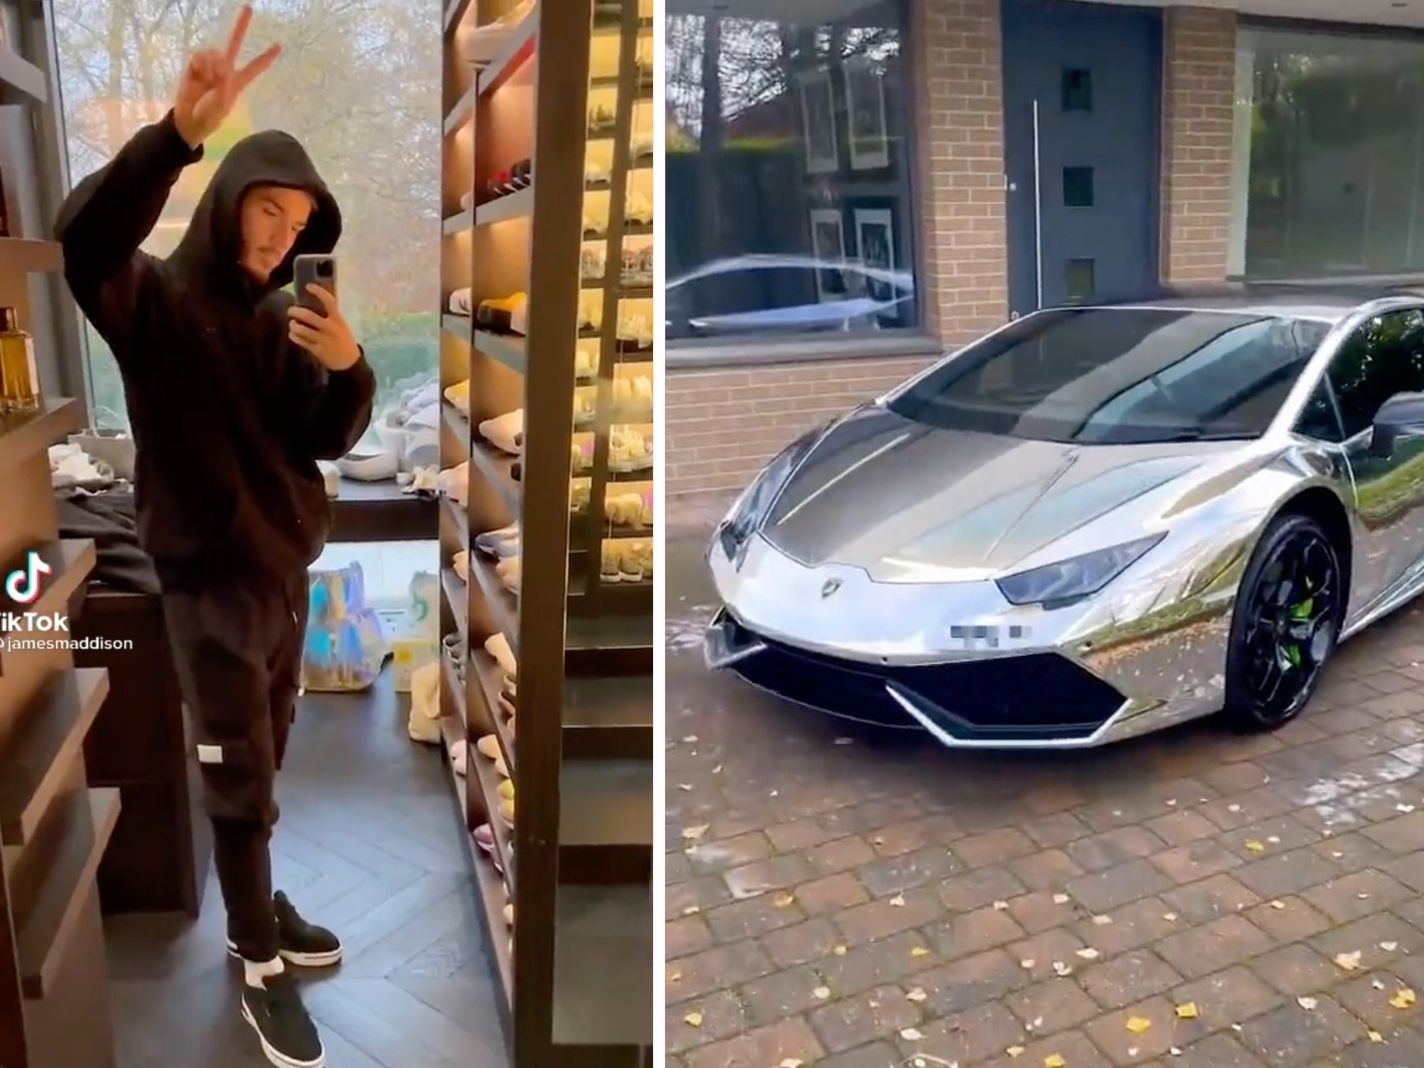 James Maddison shows off his flashy car in new TikTok video